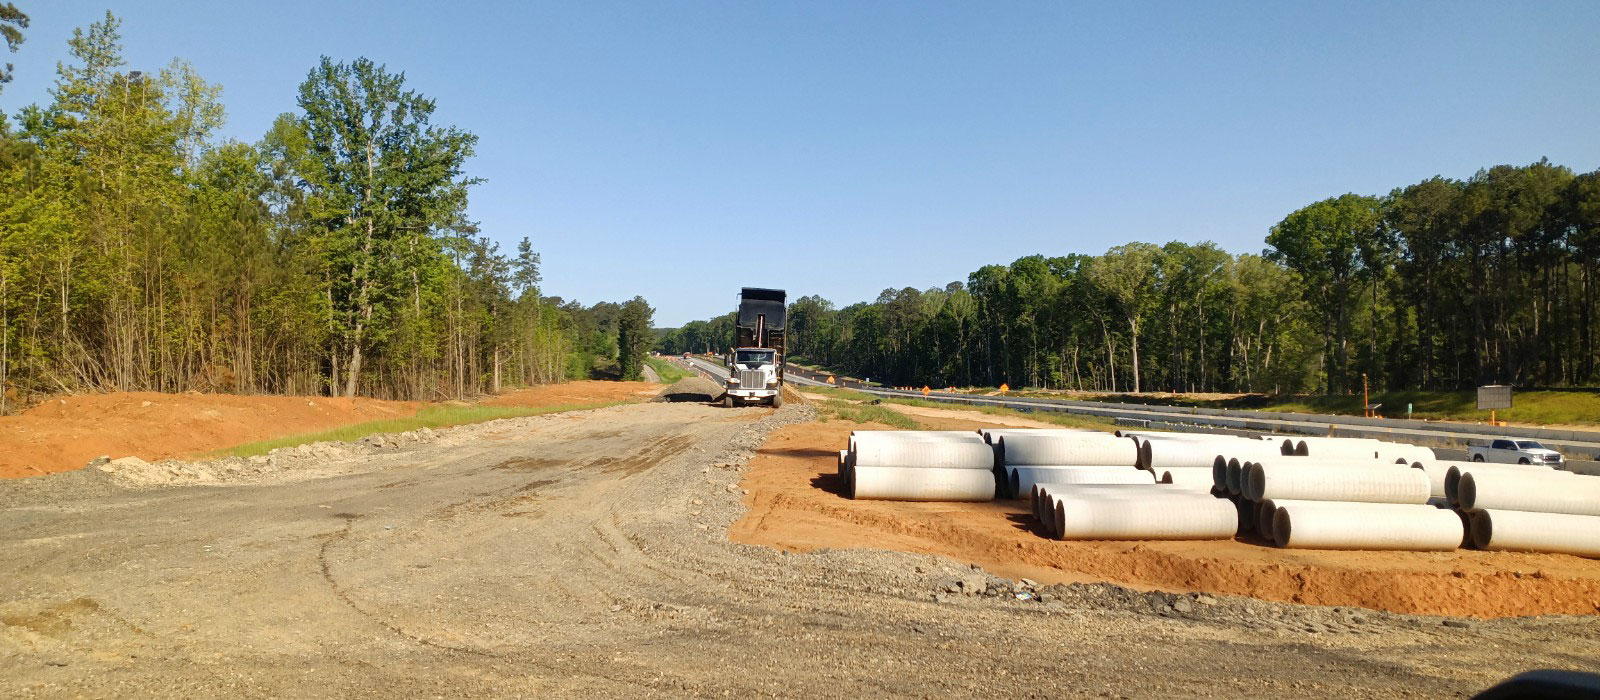 Reinforced concrete pipe is used to collect storm water.  The Midlands Connection project will use over 80,000 linear feet of concrete pipe produced right here in South Carolina!